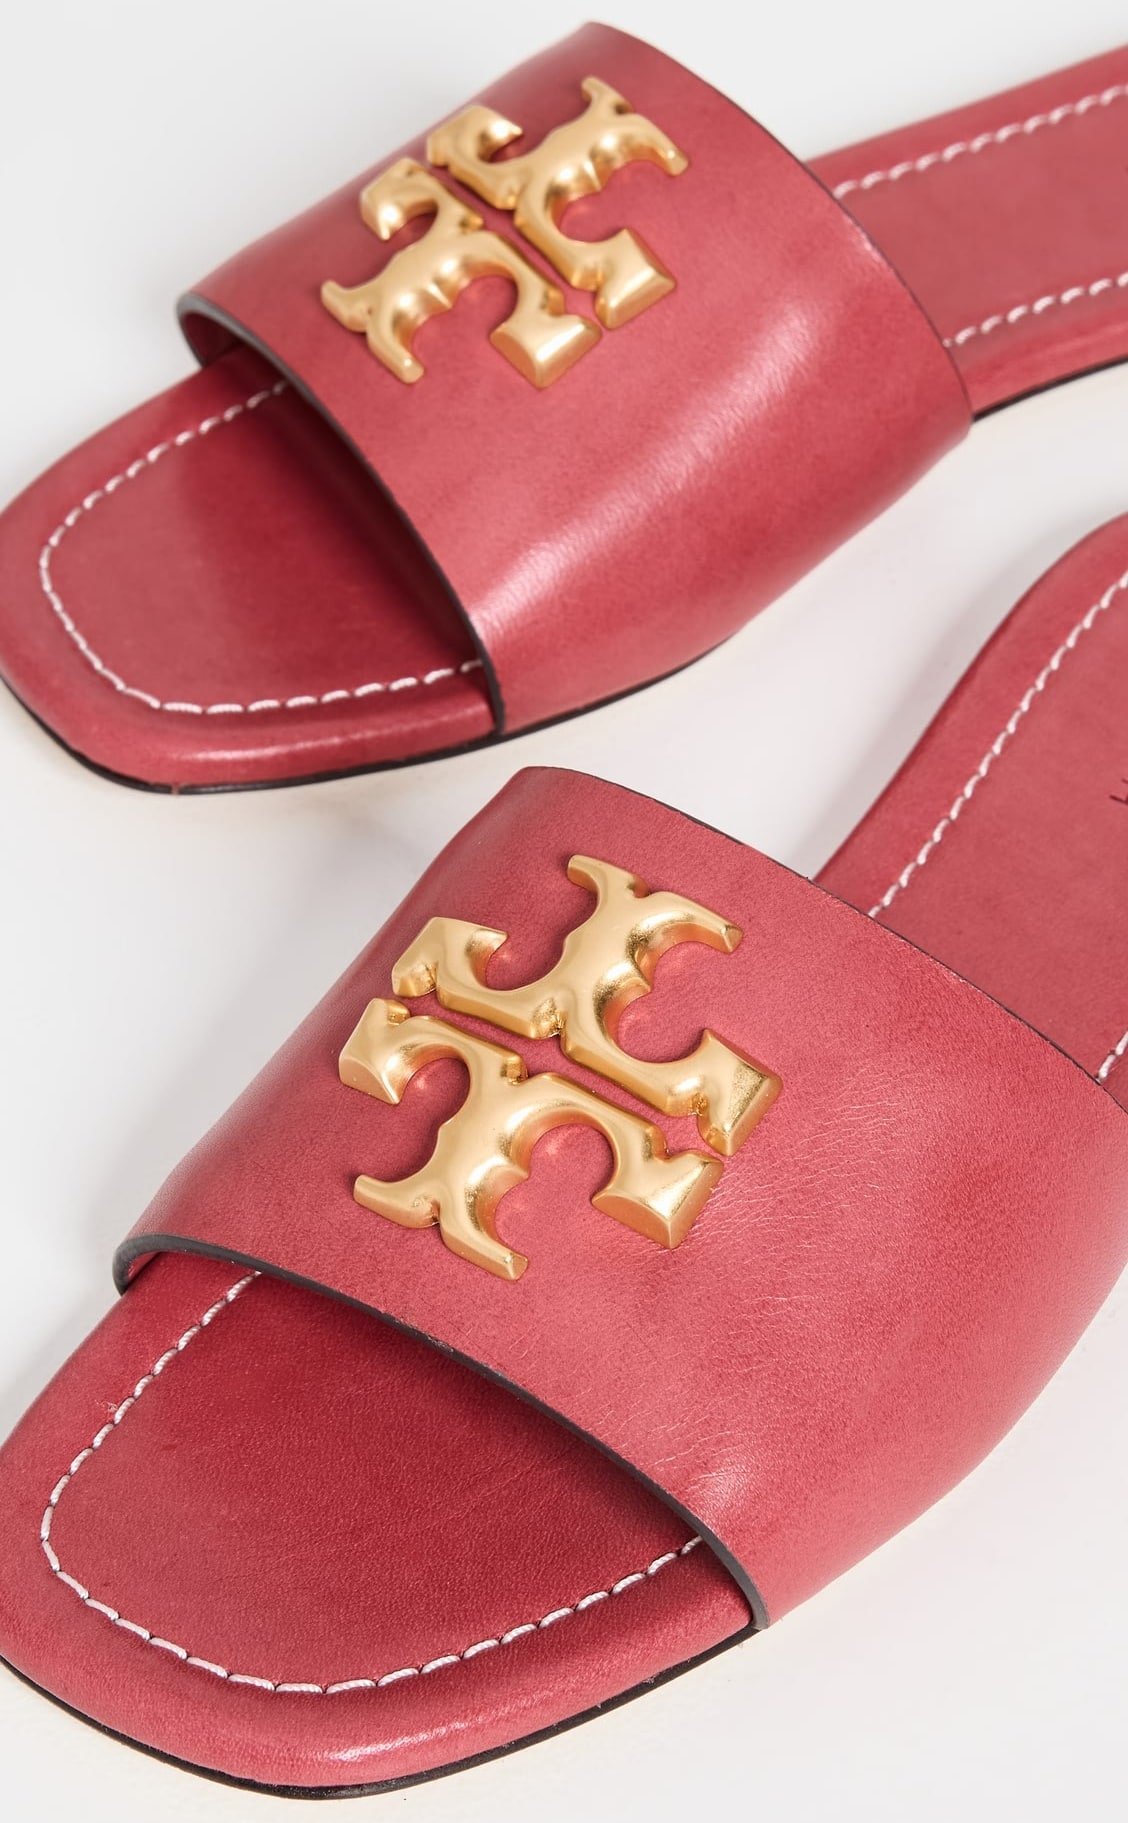 Tory Burch ballet flats real vs fake. How to spot fake Tory Burch shoes and  ballet flats 